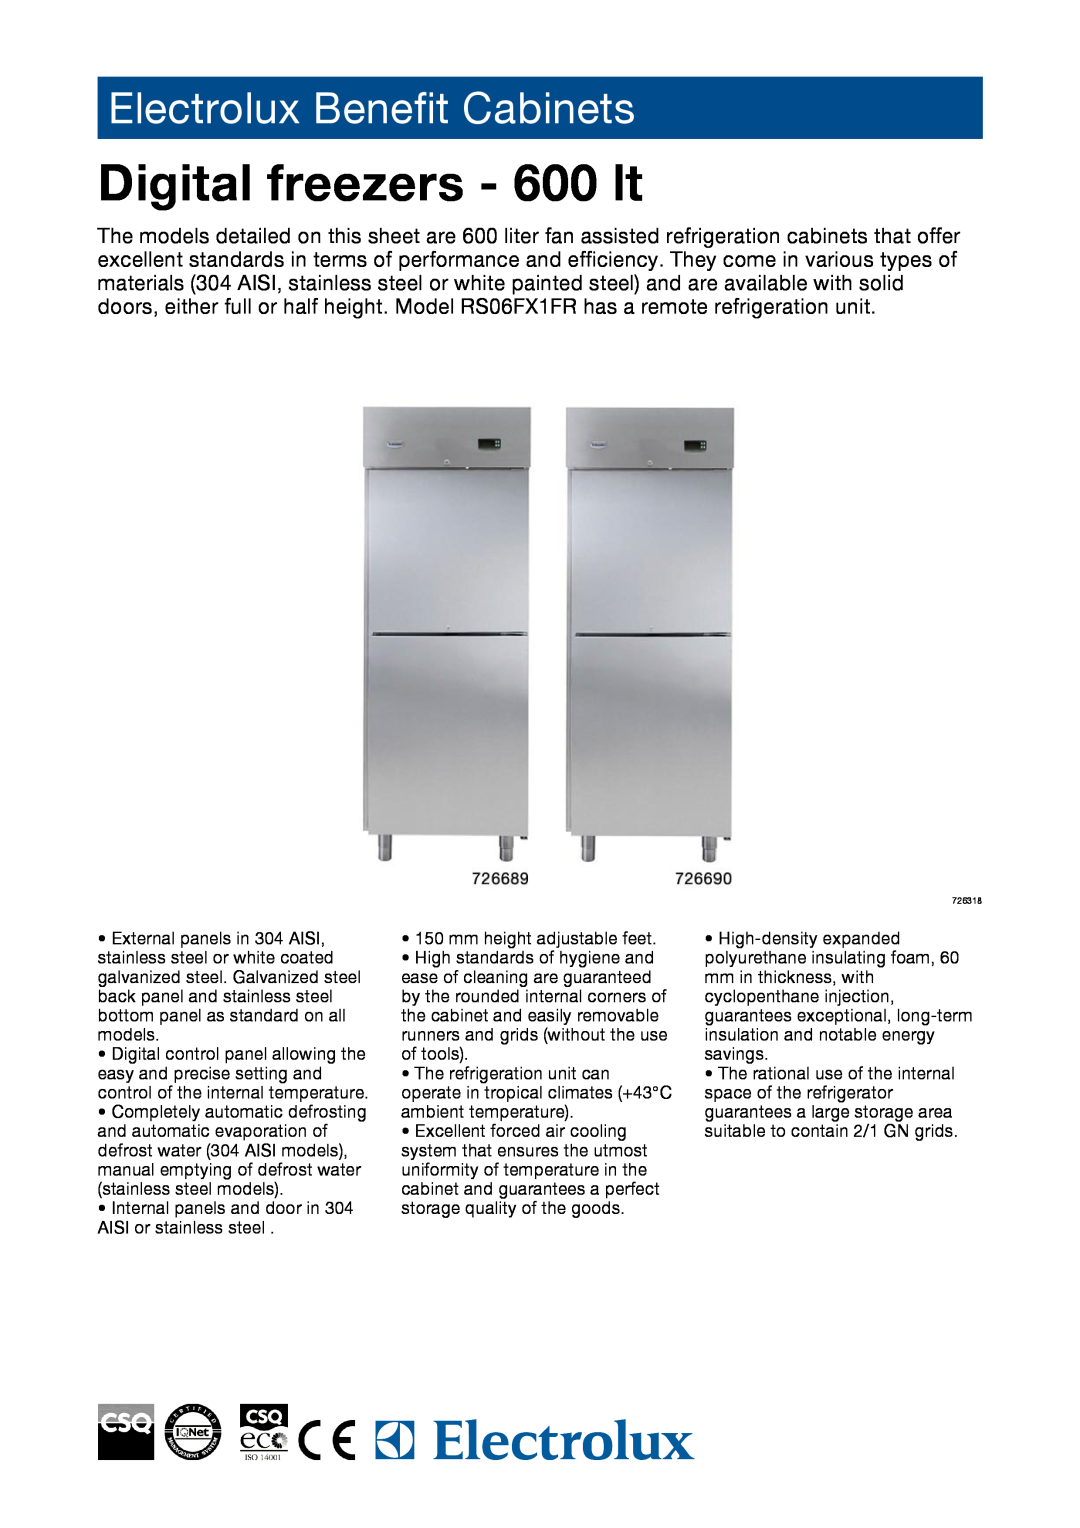 Electrolux RS06F41FS, 726318, RS06FW1F, RS06FX1FR, 727104 manual Digital freezers - 600 lt, Electrolux Benefit Cabinets 